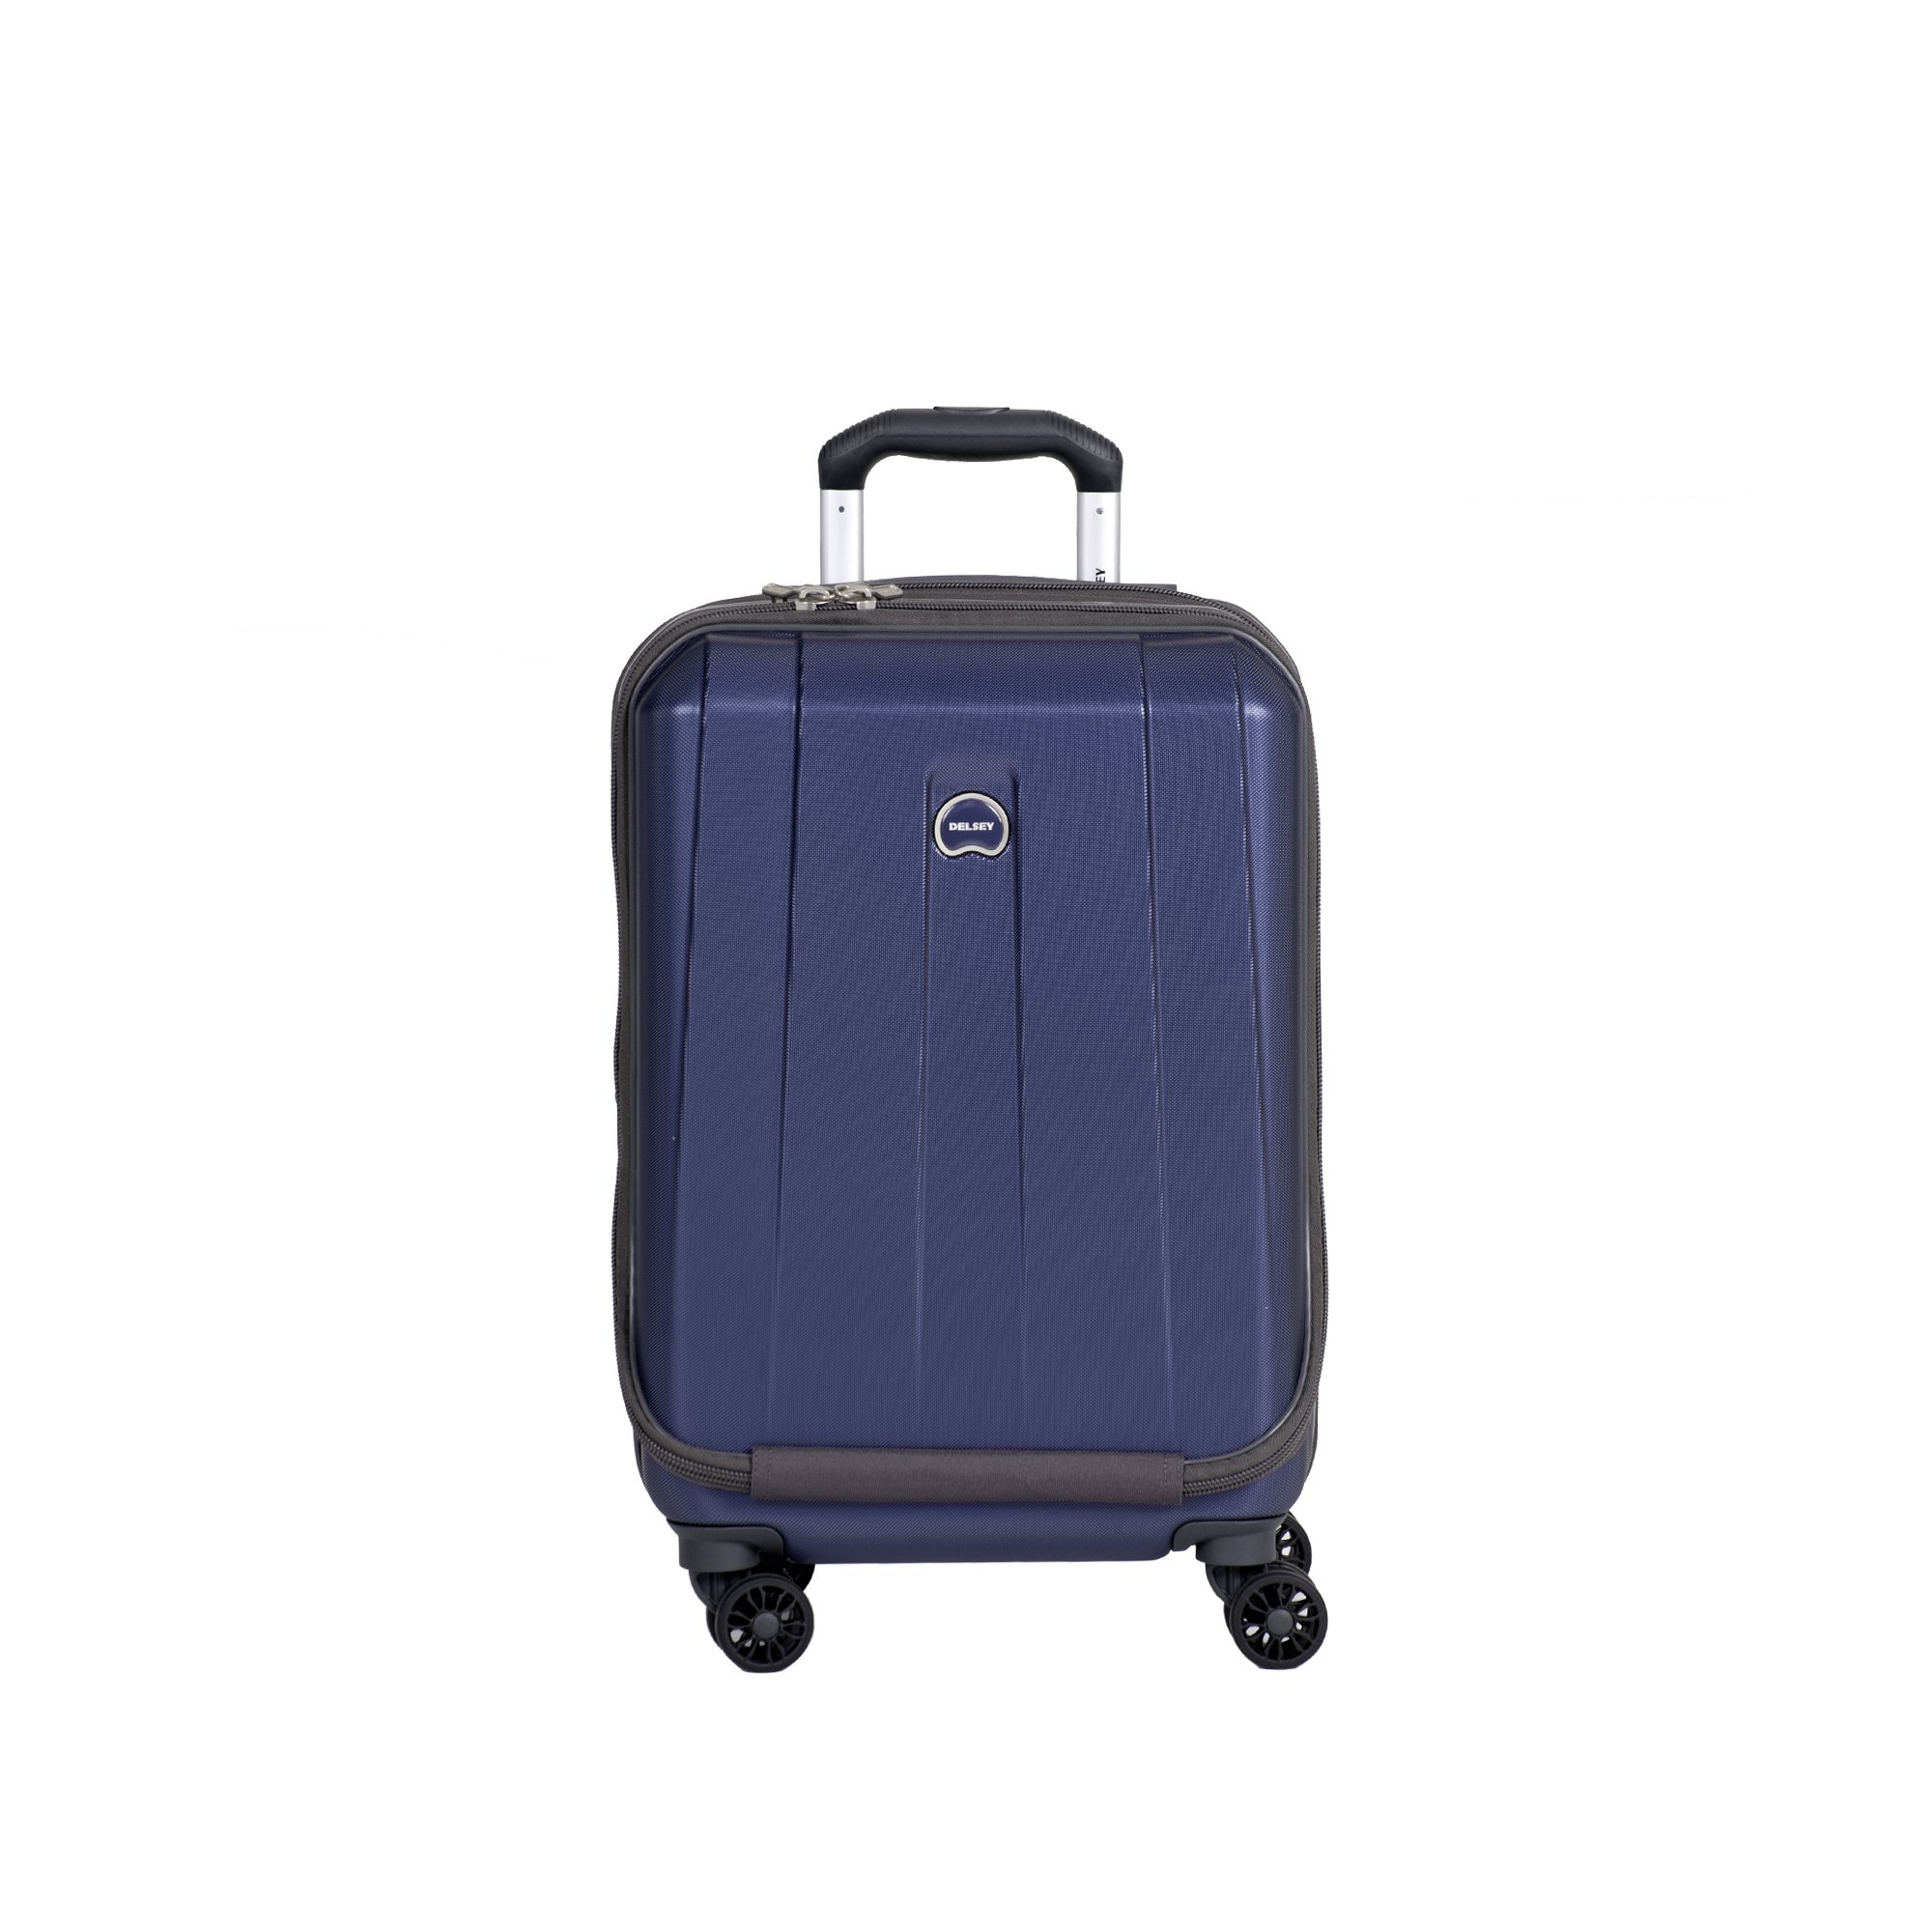 Delsey Luggage Helium Shadow 3.0 19 Inch International Carry On Expandable